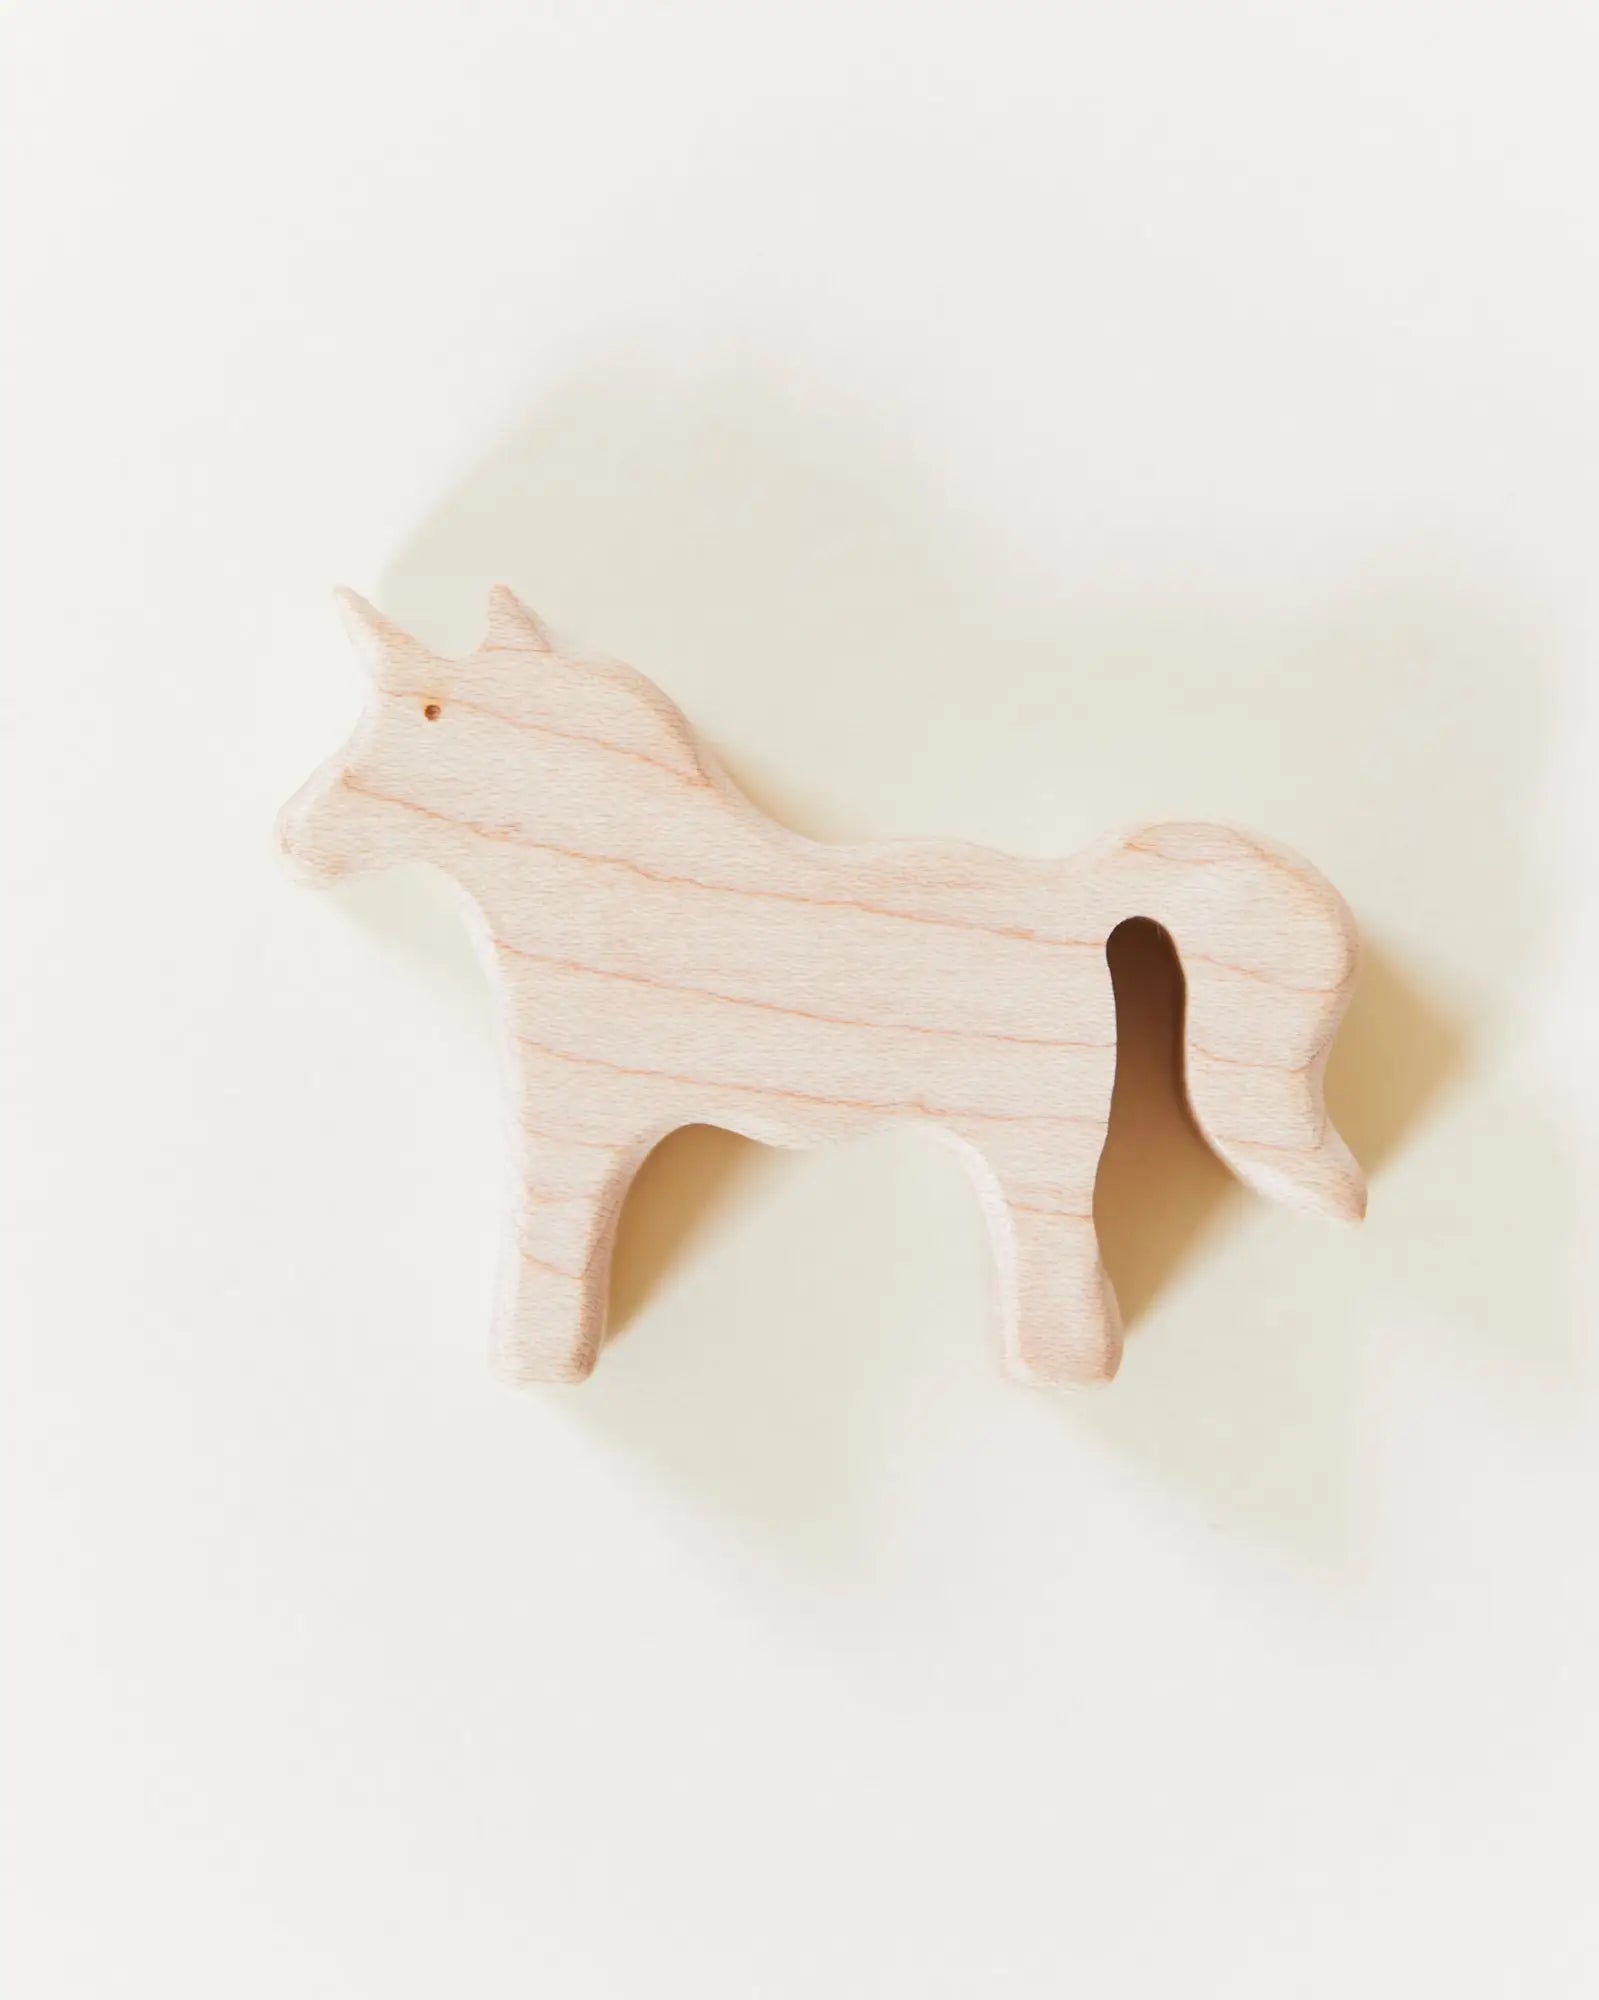 Wooden Unicorn in Mahogany or Maple Wood Wooden Toy - Alder & Alouette